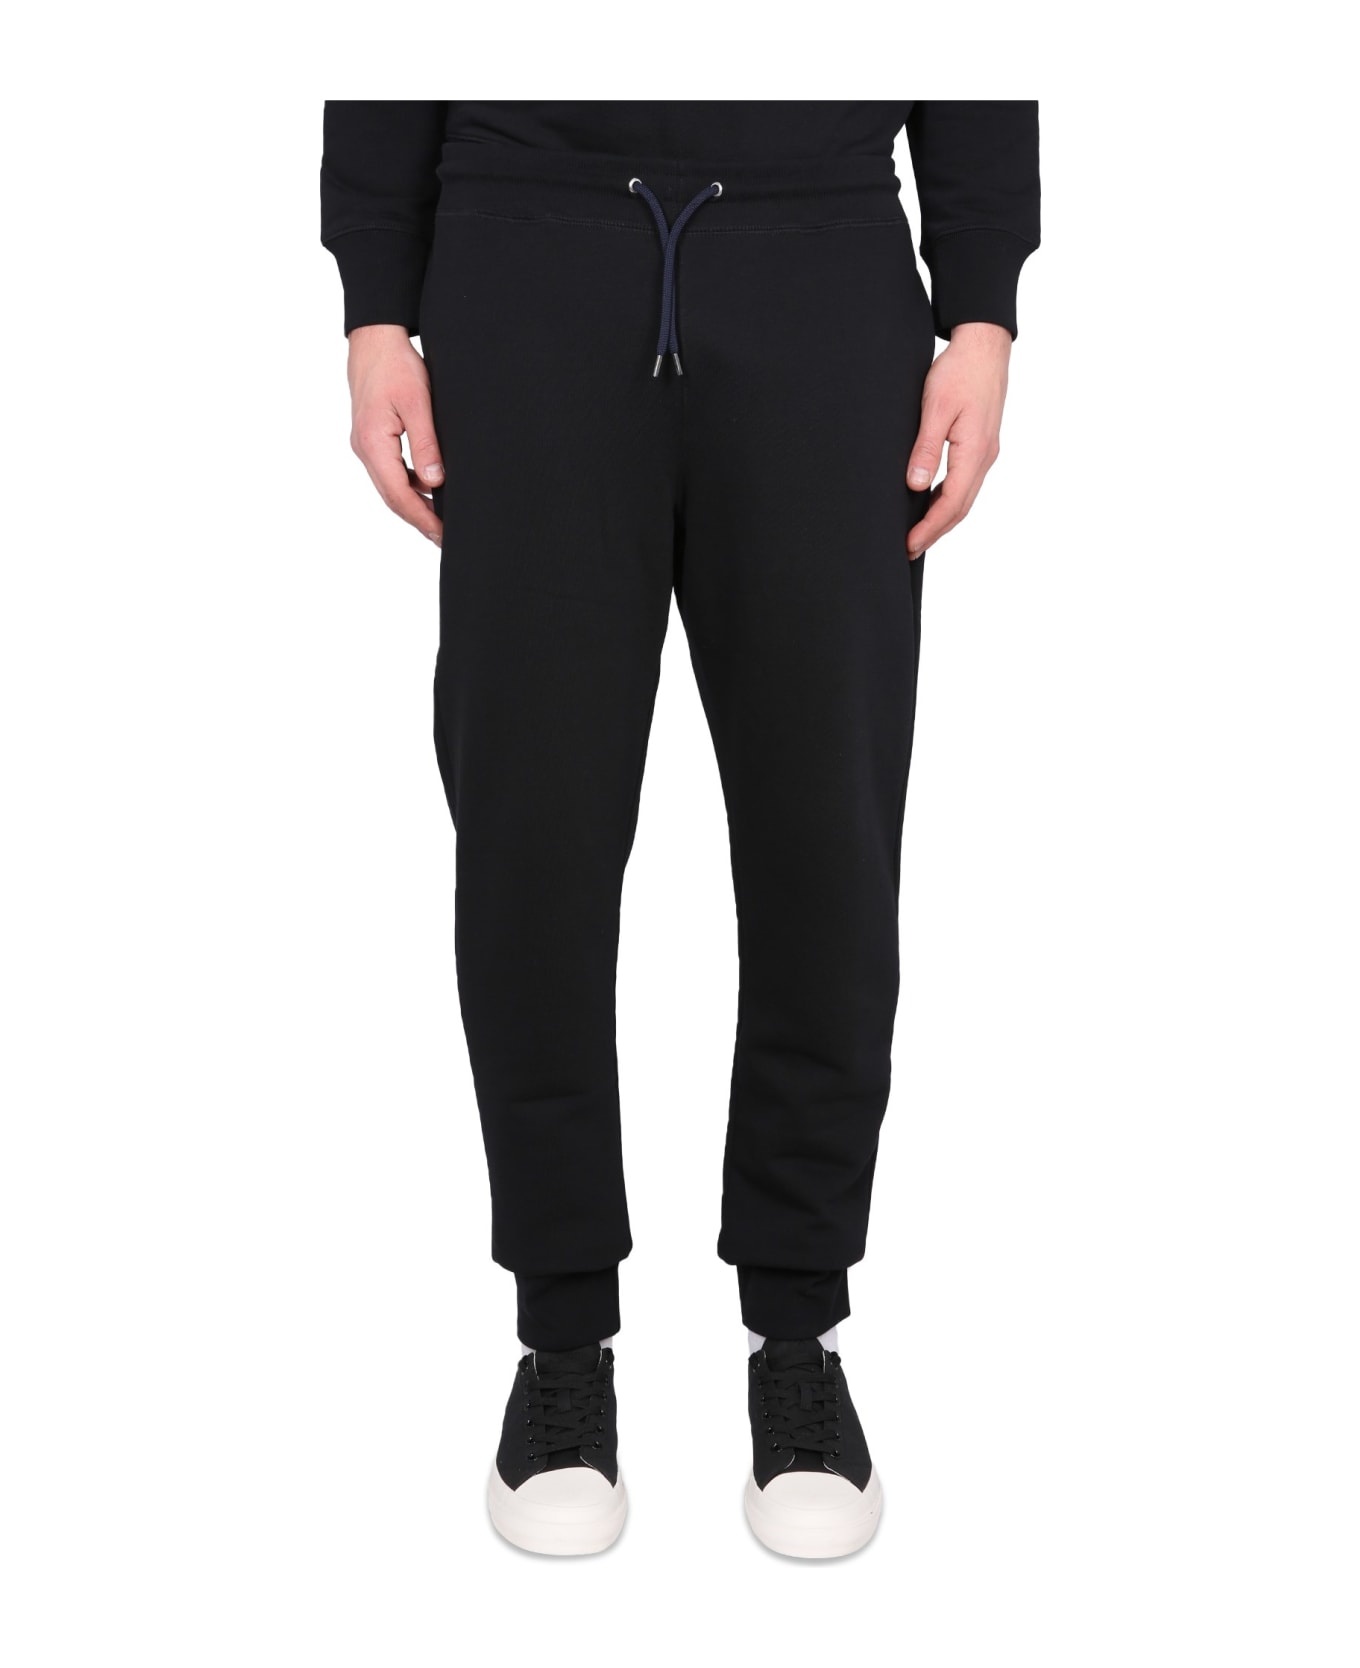 PS by Paul Smith Jogging Pants - NERO